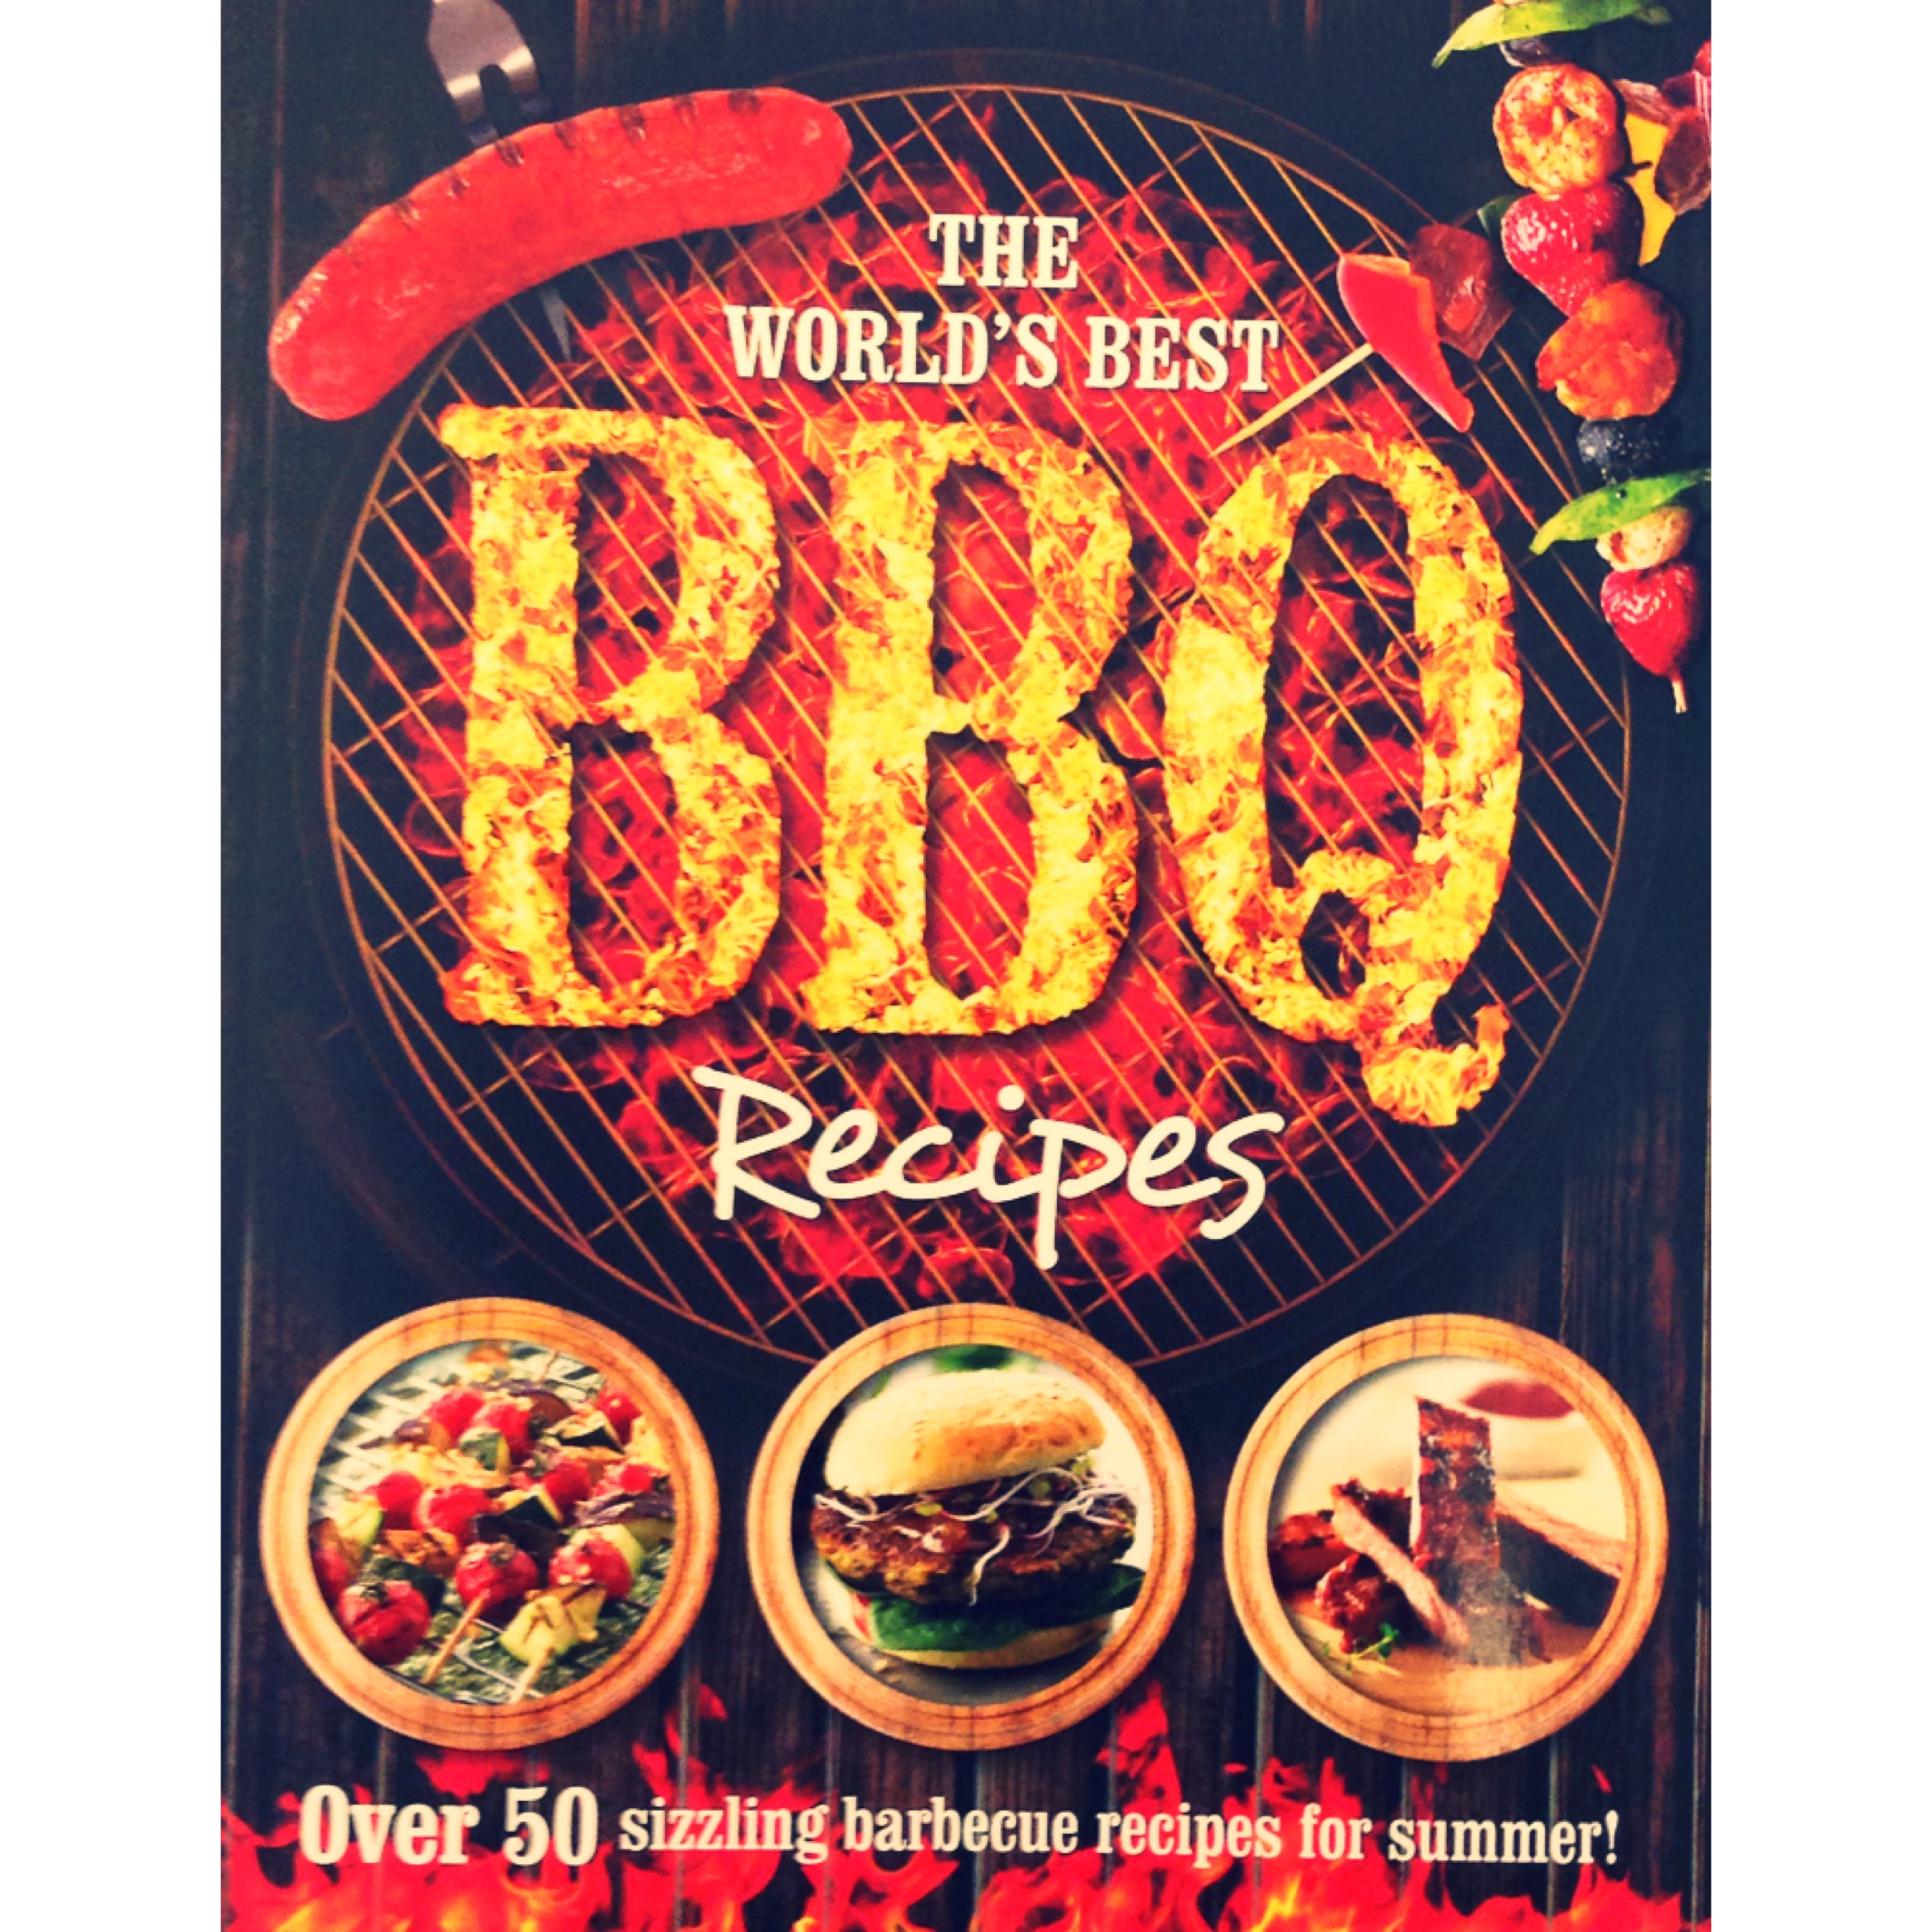 The World’s Best BBQ Recipes